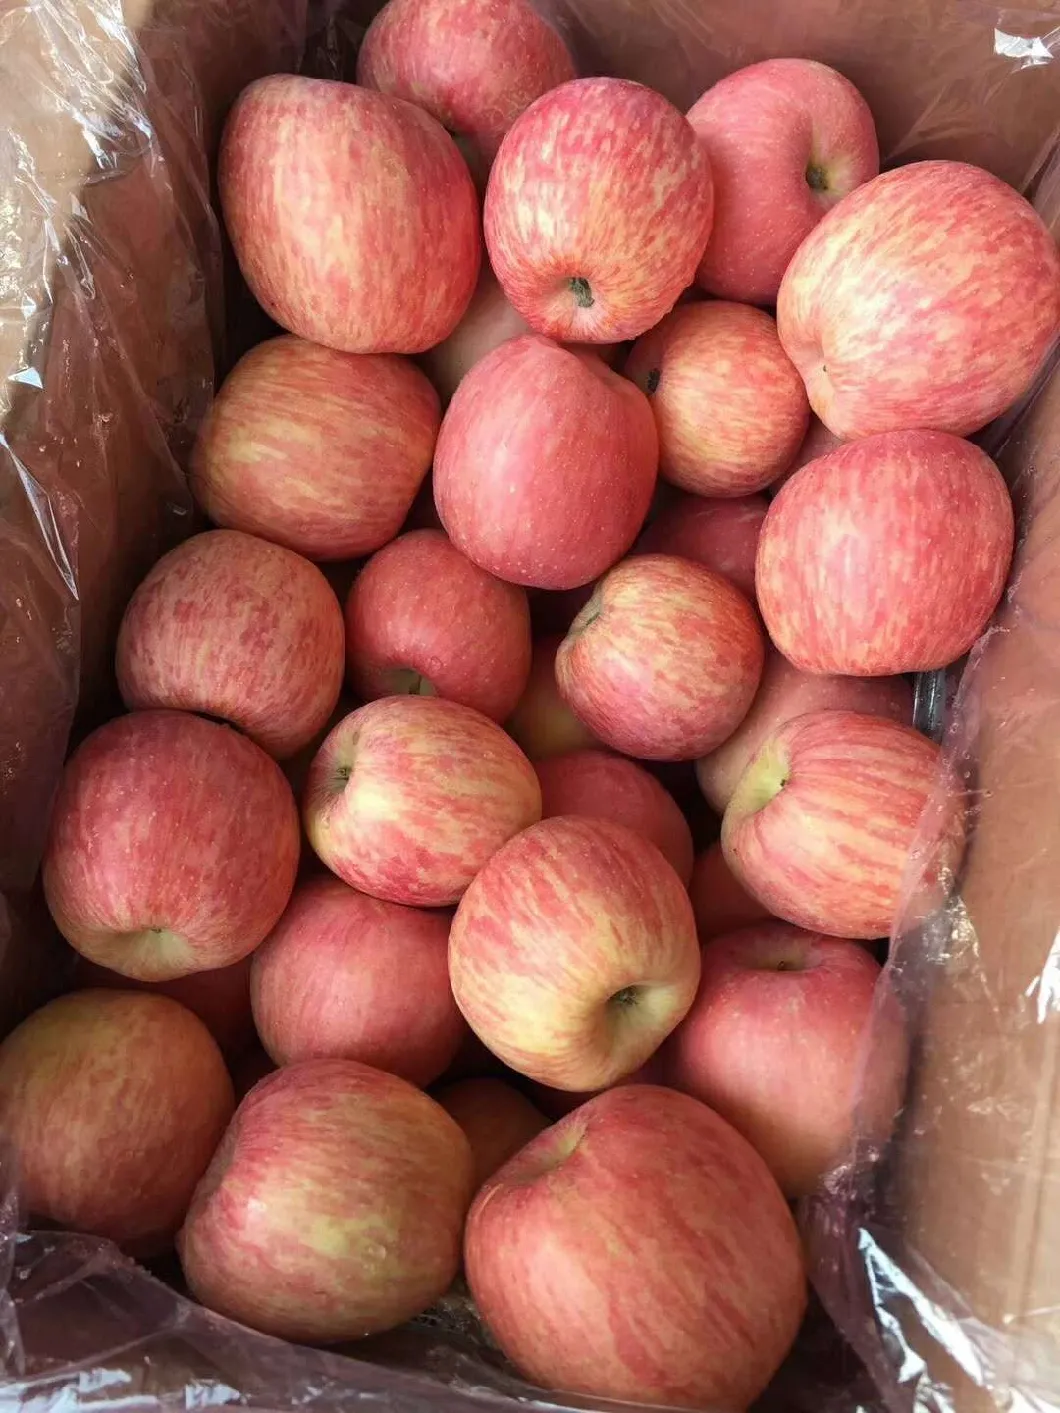 Hot Sale New Crop Fresh FUJI Apple From China High Quality